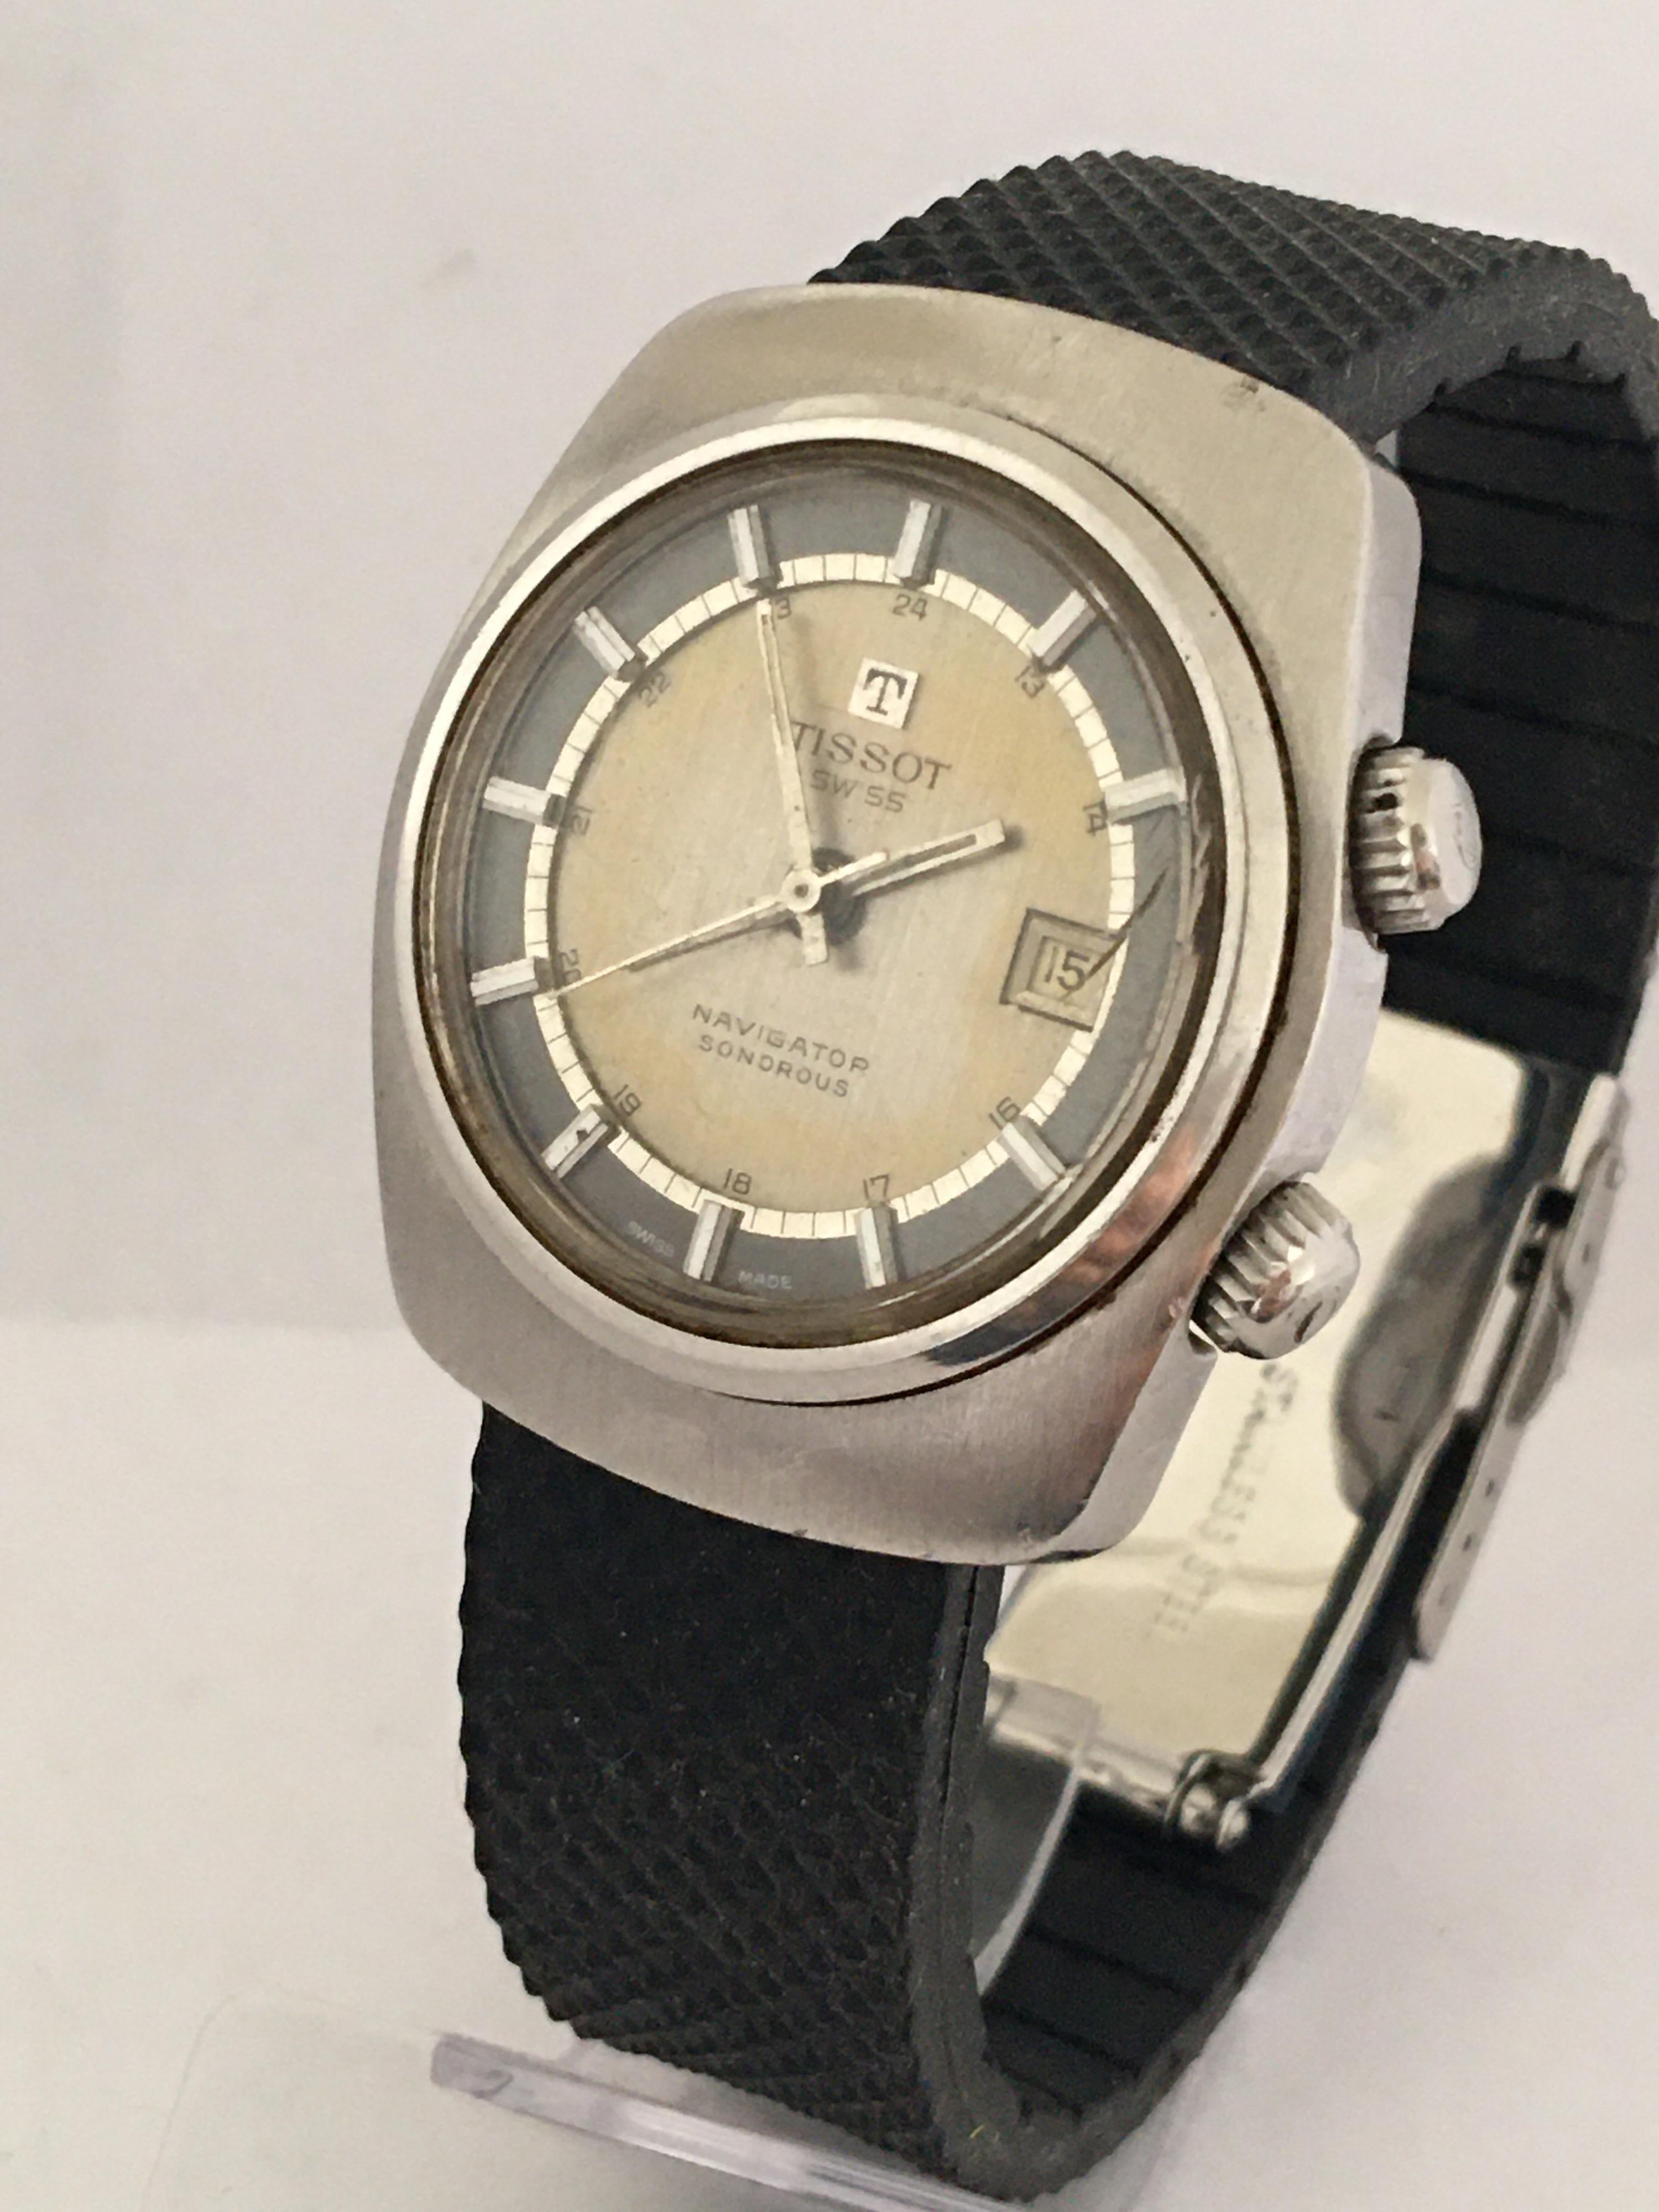 This Pre-own Mechanical Vintage Gentleman’s Alarm Watch is in good working condition and it is ticking well. 

Viable tiny scratches on the watch case, the dial has aged and a visible crack on the edge of the top glass as shown. 

Please study the